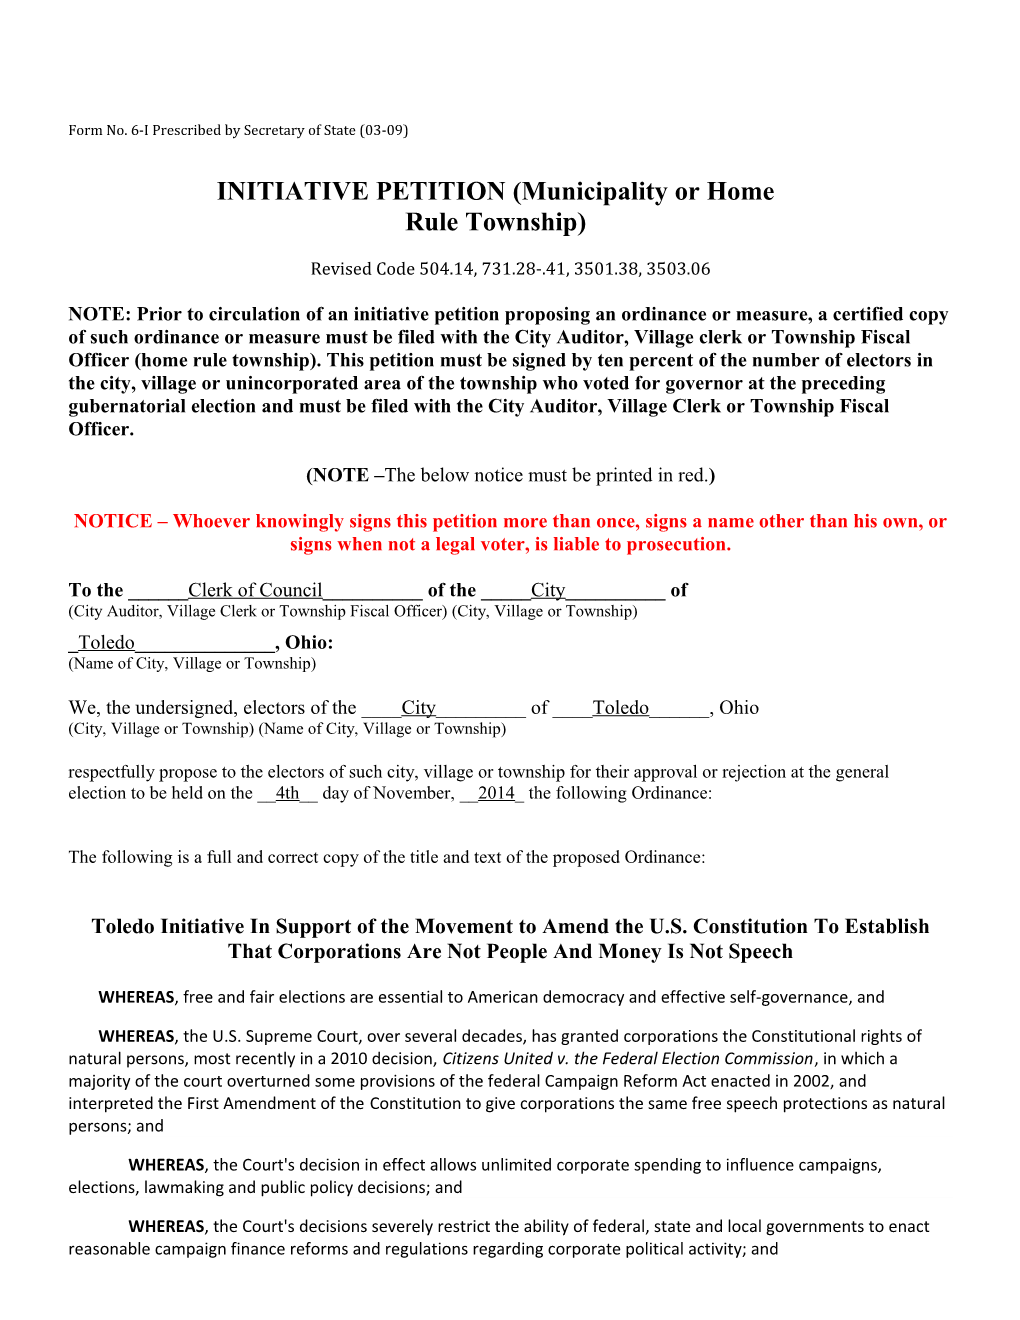 INITIATIVE PETITION(Municipality Or Home Rule Township)